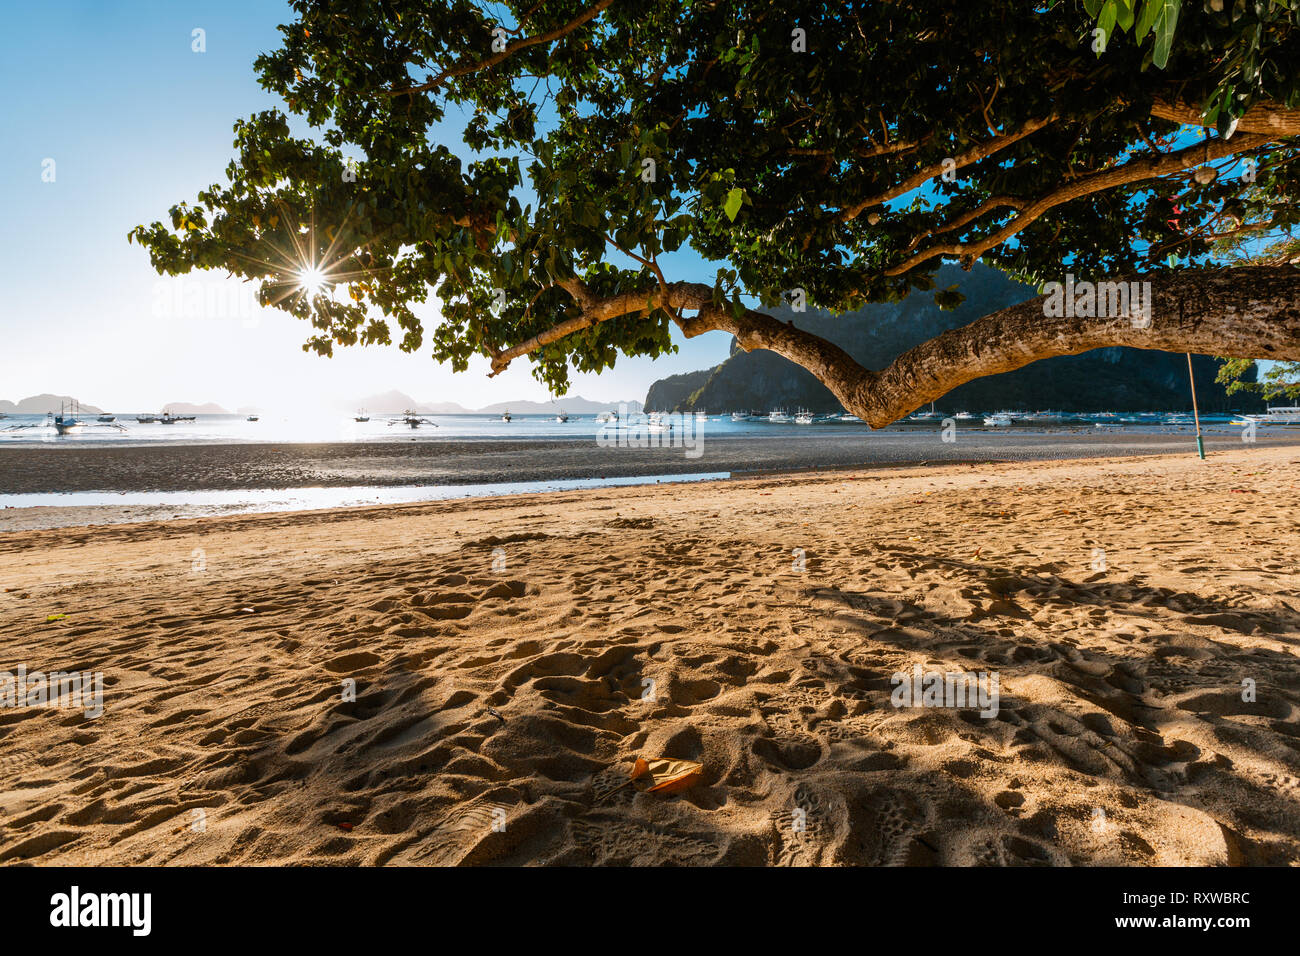 Local boat on the shore of El Nido beach in Palawan island, Philippines Stock Photo